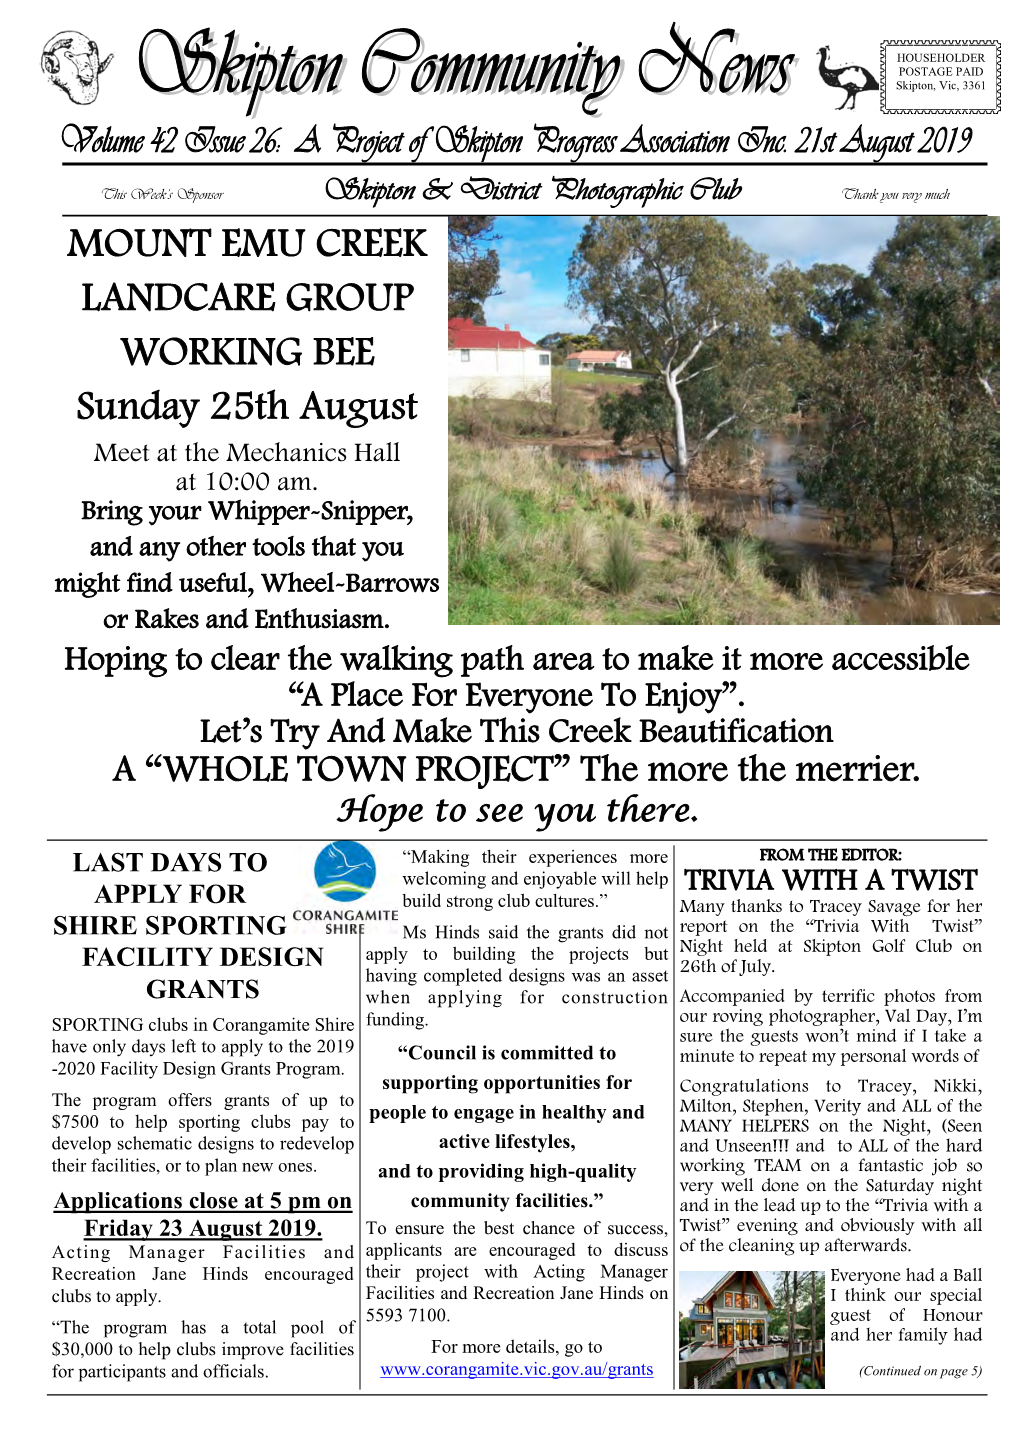 MOUNT EMU CREEK LANDCARE GROUP WORKING BEE Sunday 25Th August Meet at the Mechanics Hall at 10:00 Am